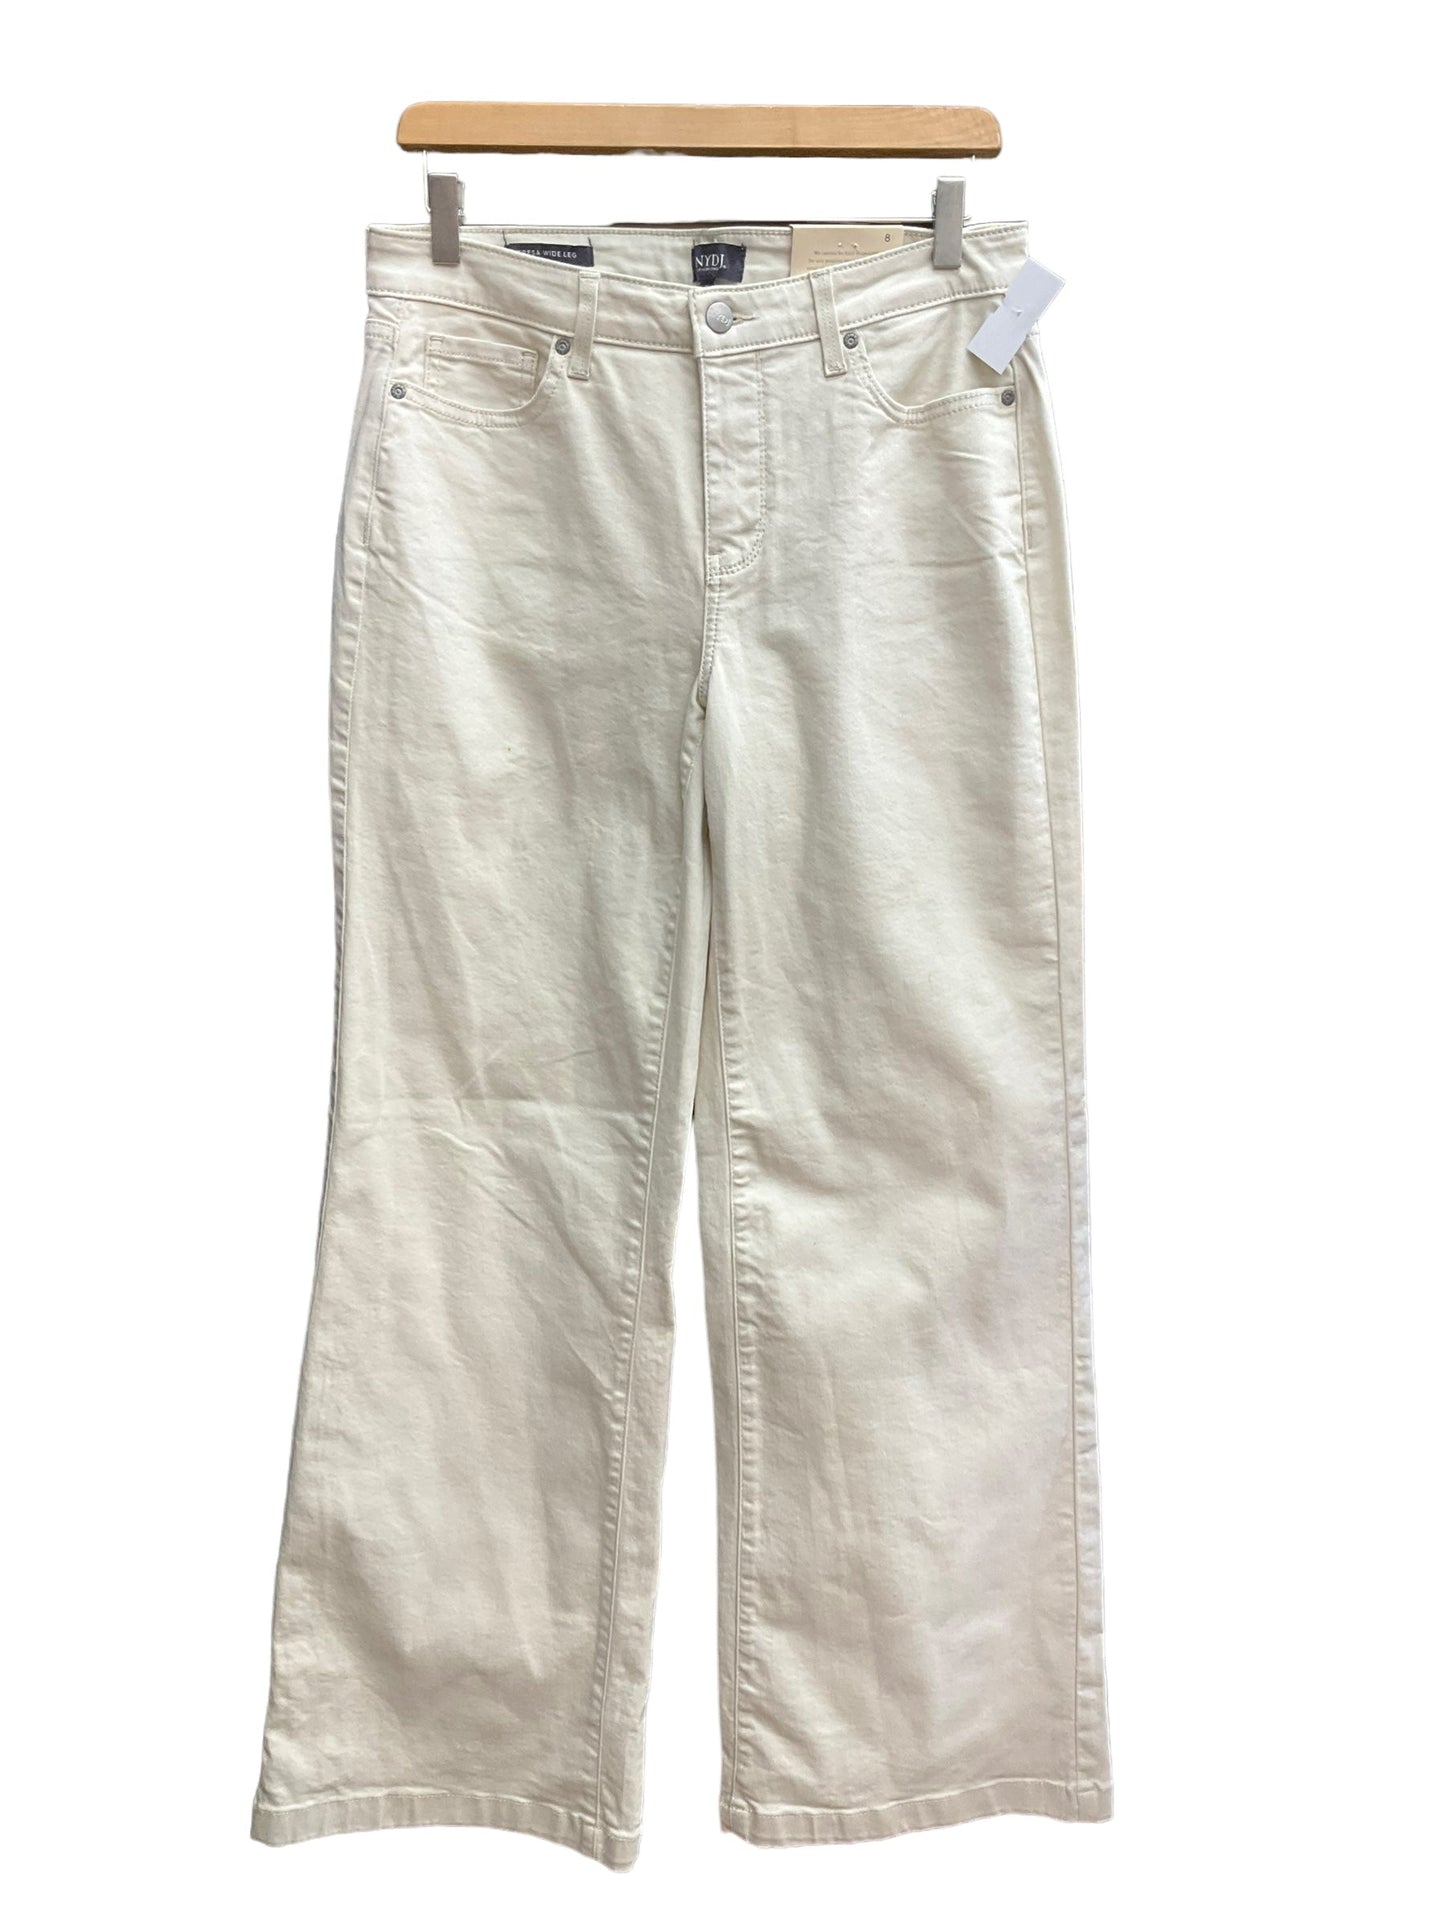 Cream Jeans Flared Not Your Daughters Jeans, Size 8